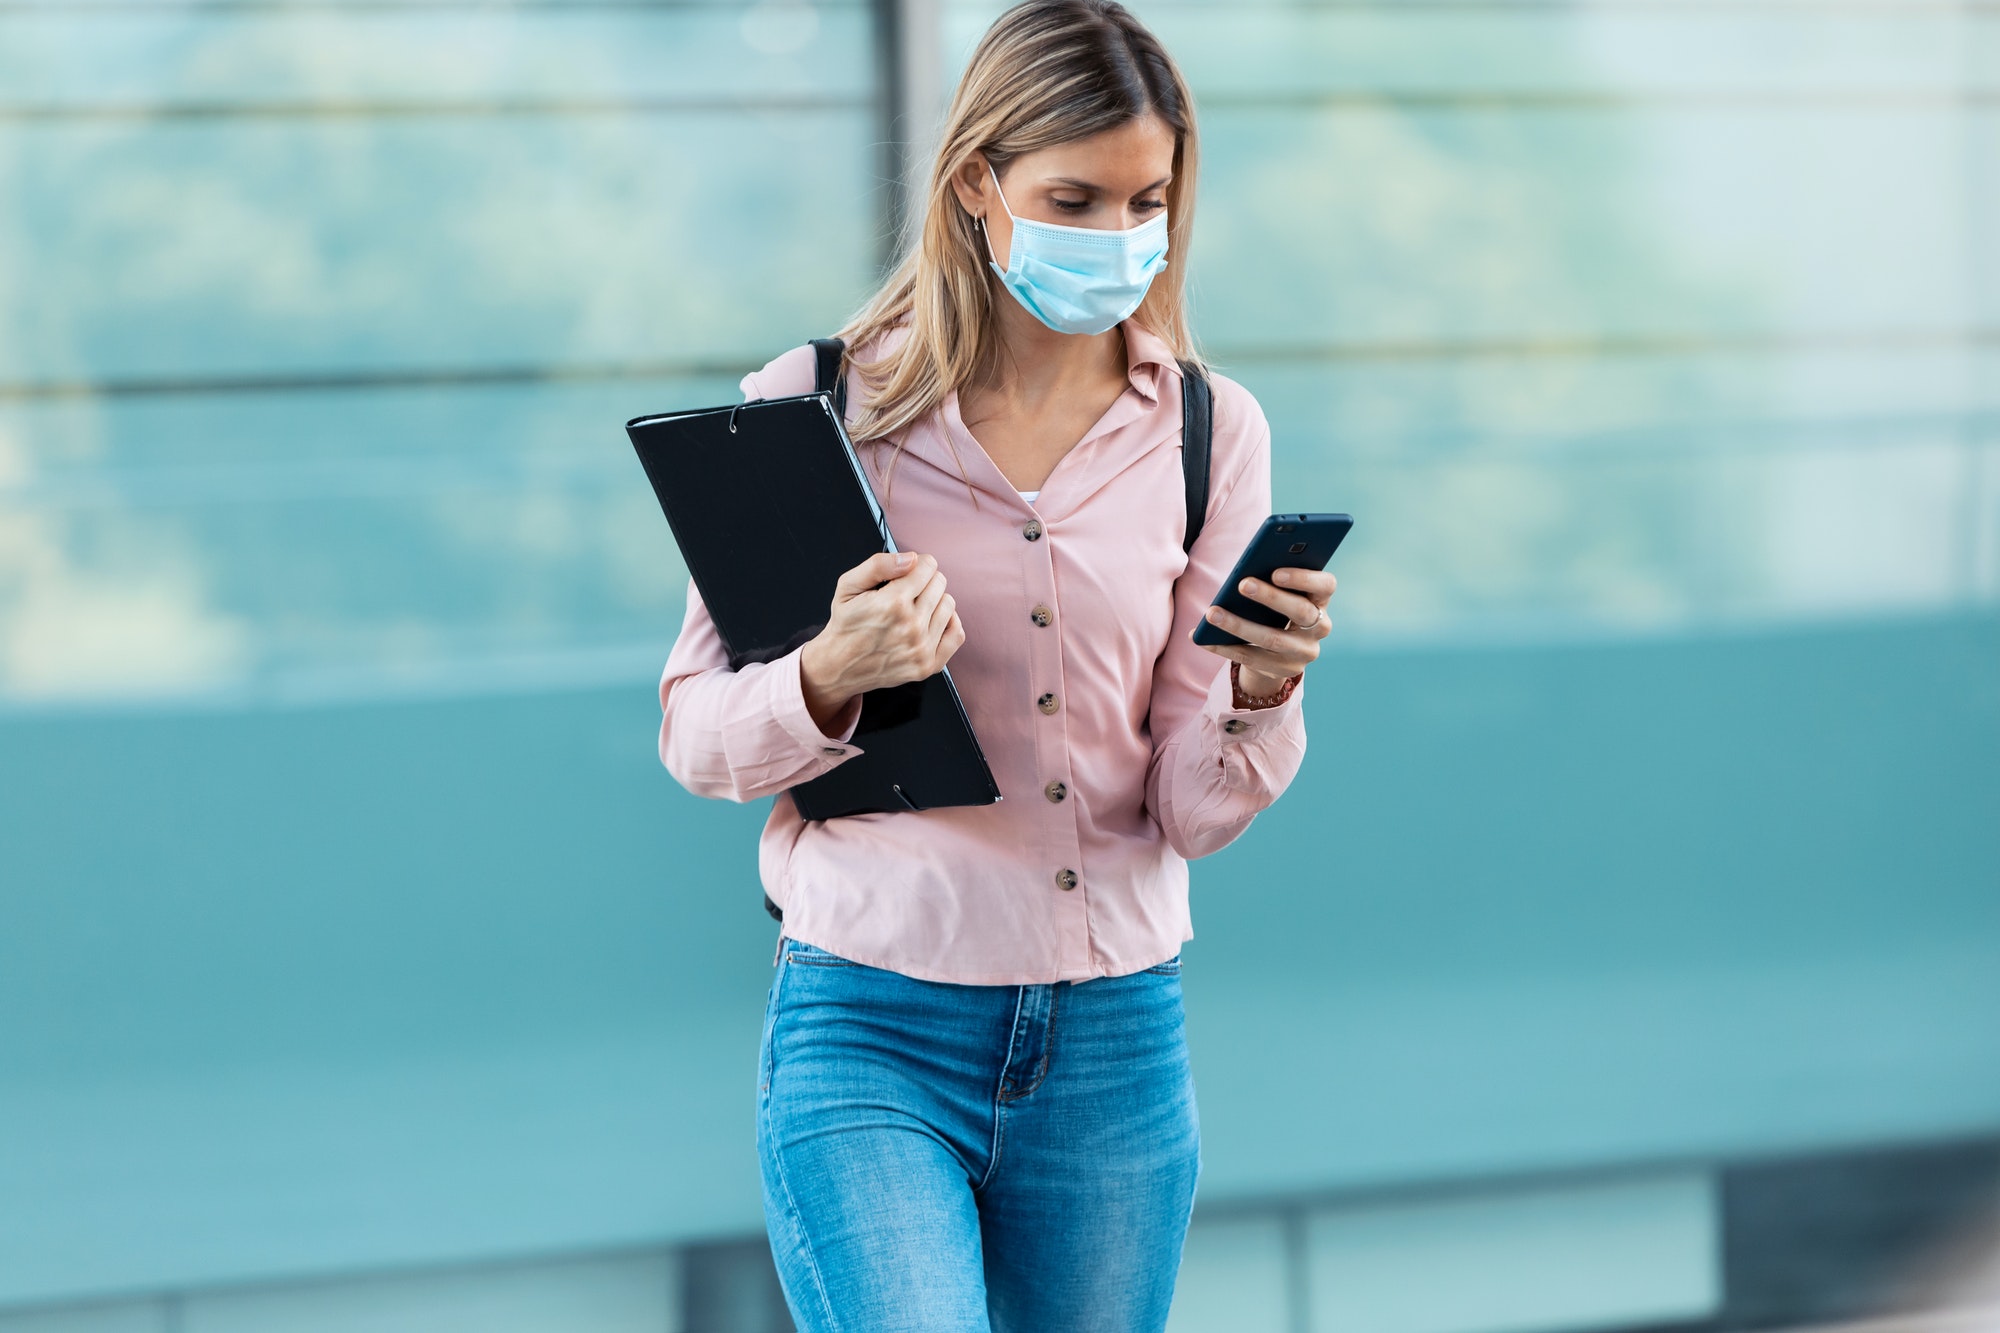 Beautiful blonde woman in face mask using her mobile phone while walking in the street.